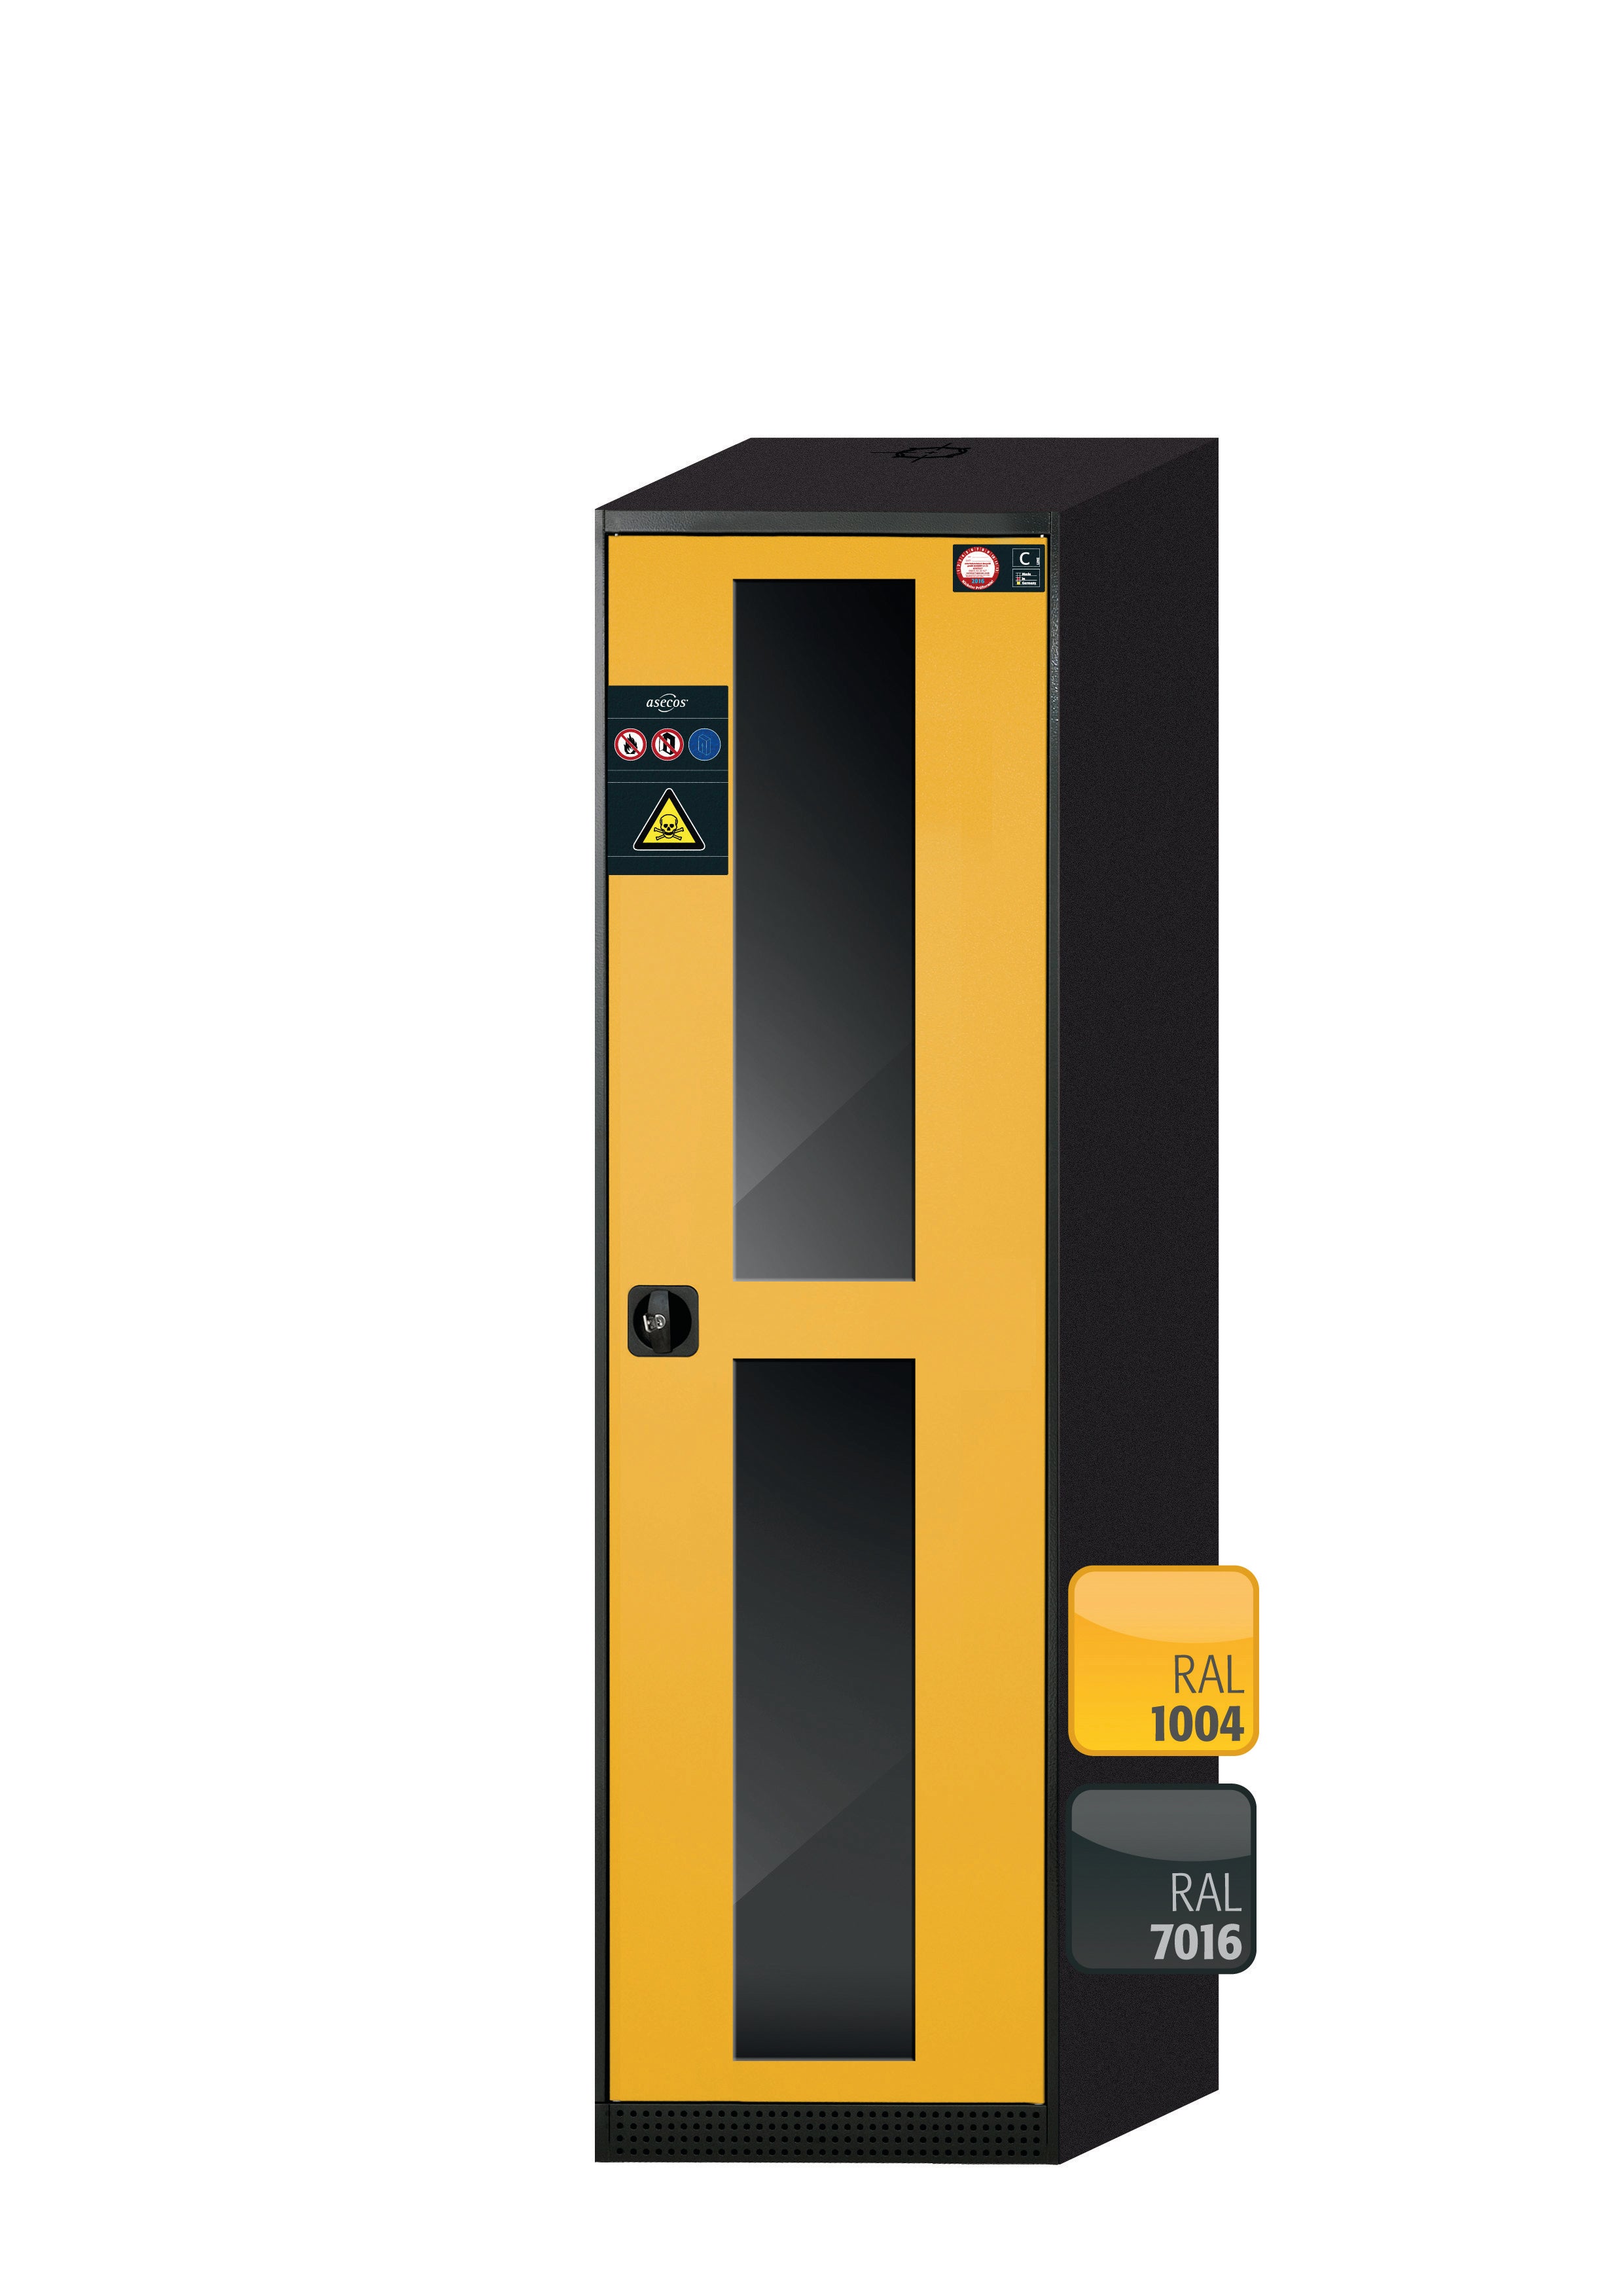 Chemical cabinet CS-CLASSIC-G model CS.195.054.WDFWR in safety yellow RAL 1004 with 5x AbZ shelf pull-outs (sheet steel/polypropylene)